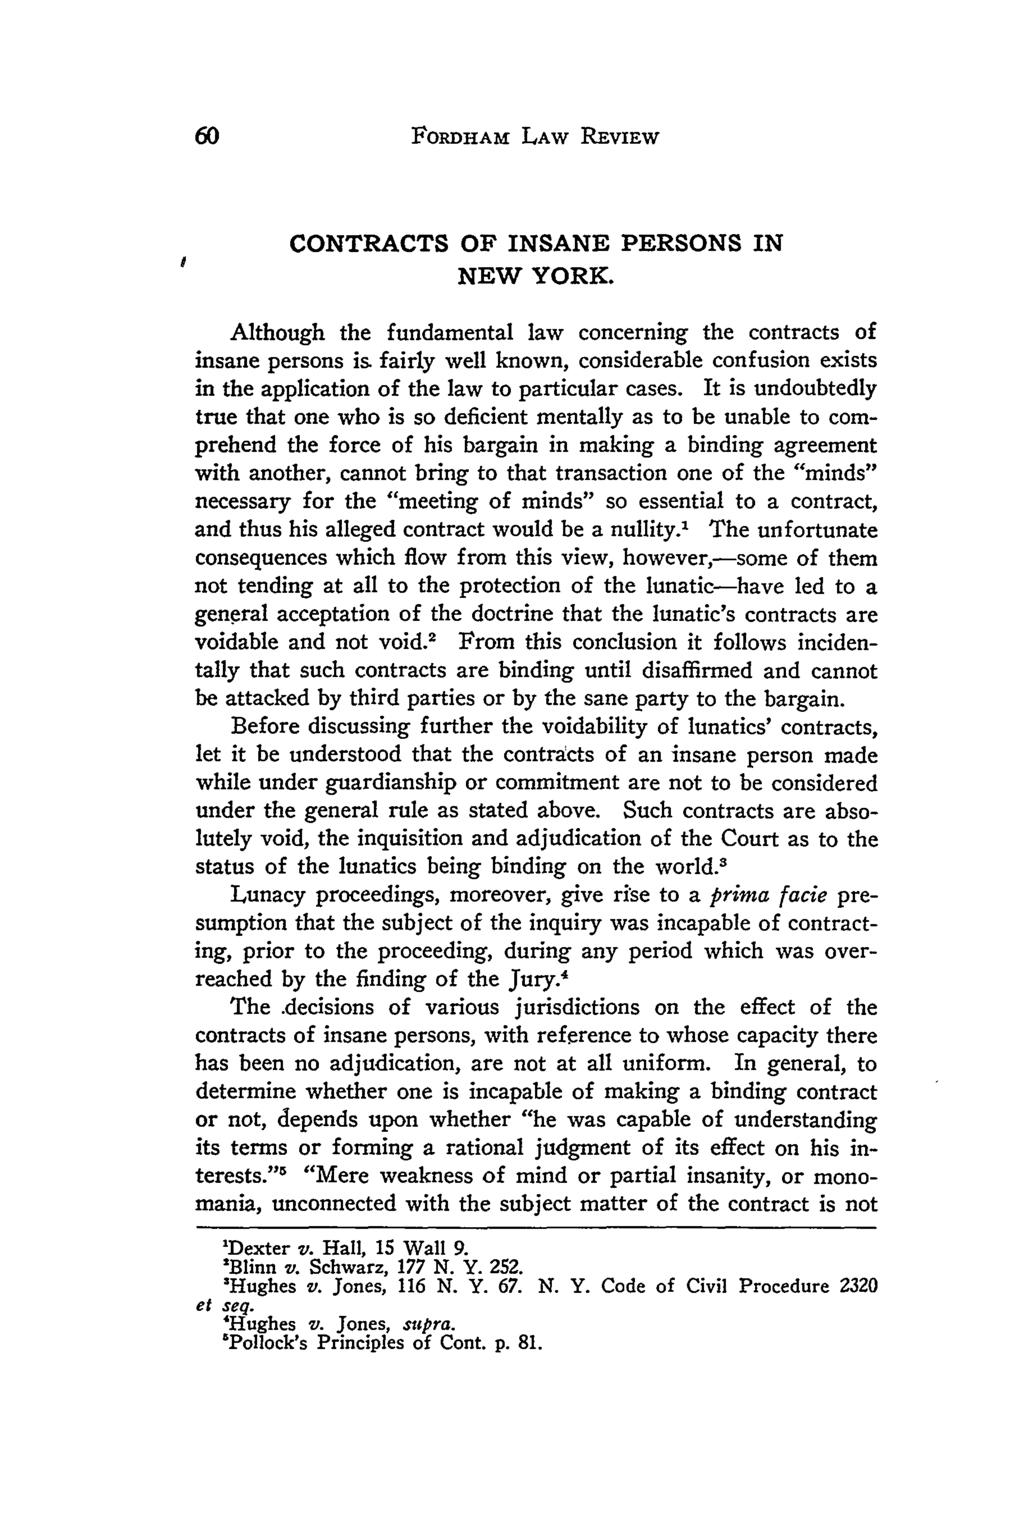 CONTRACTS OF INSANE PERSONS IN NEW YORK.